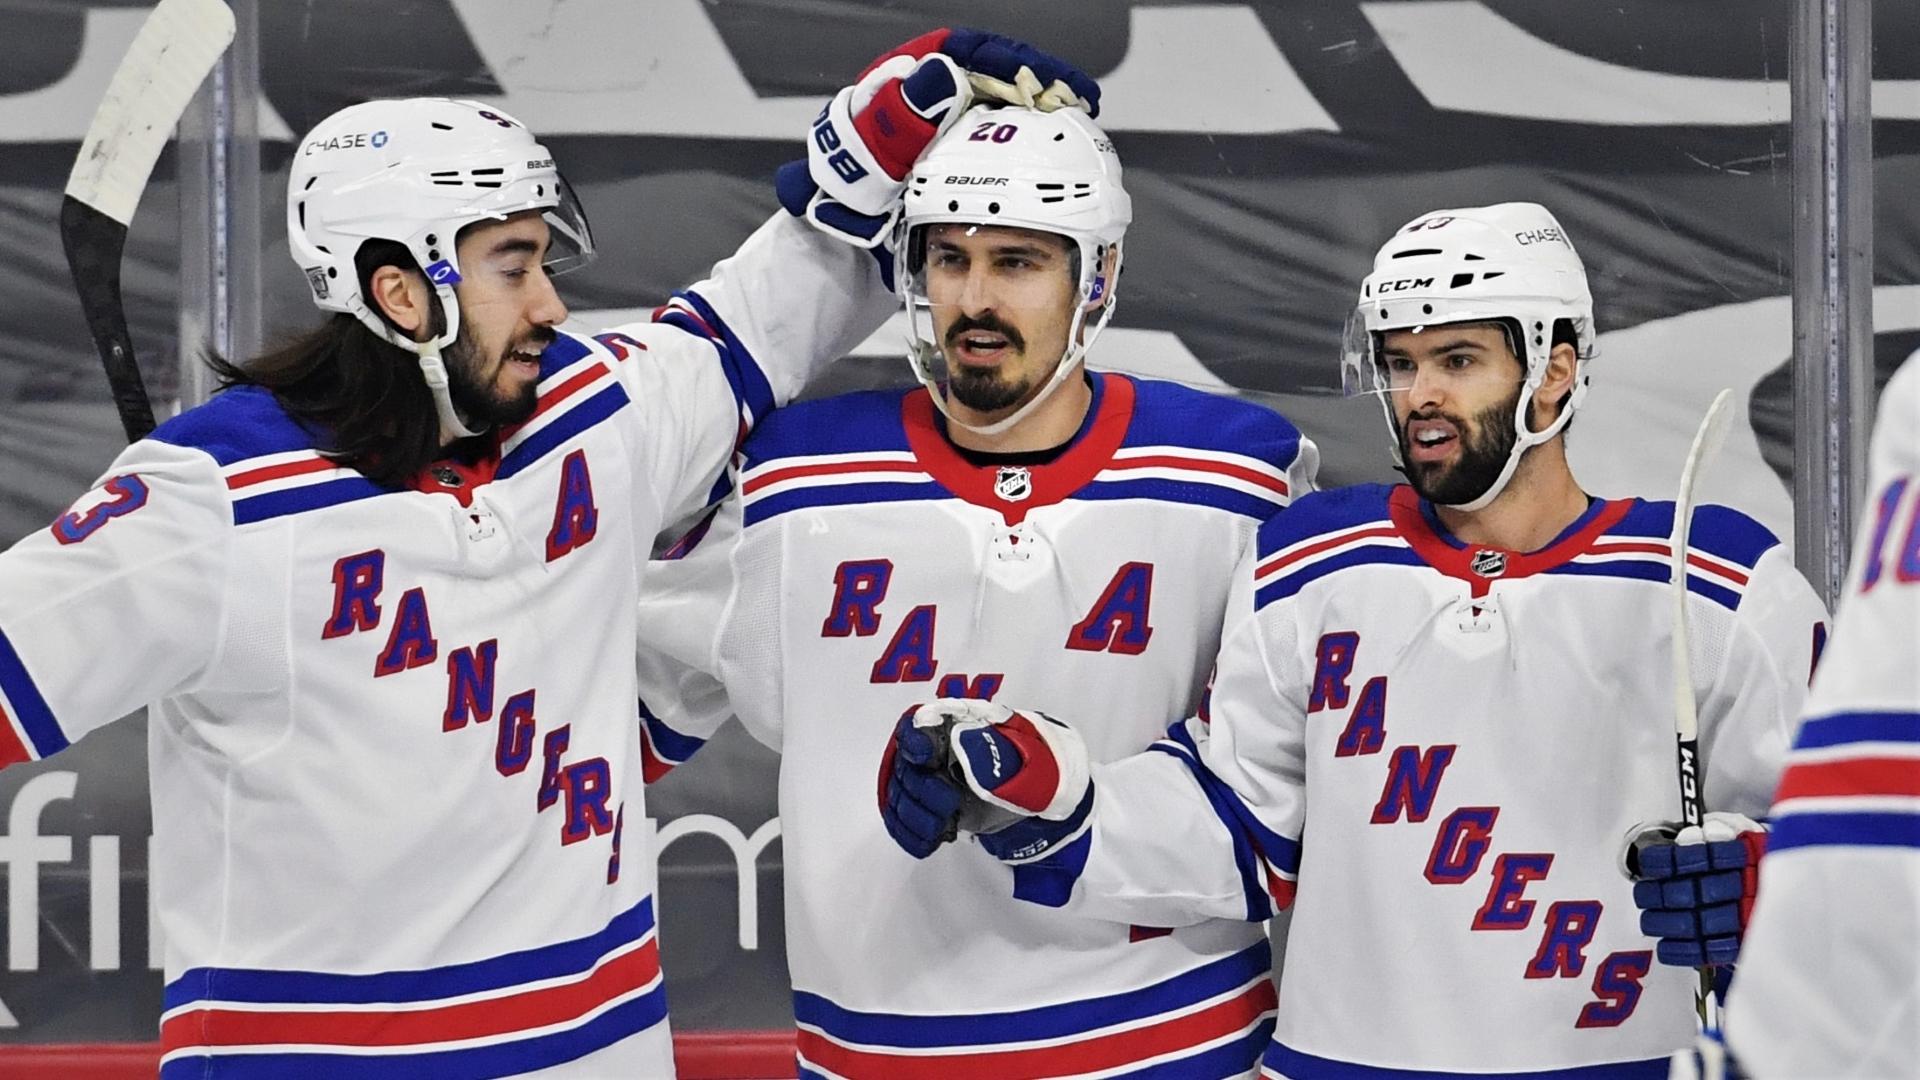 Feb 24, 2021; Philadelphia, Pennsylvania, USA; New York Rangers left wing Chris Kreider (20) celebrates his goal with center Mika Zibanejad (93) and center Colin Blackwell (43) against the Philadelphia Flyers during the first period at Wells Fargo Center. Mandatory Credit: Eric Hartline-USA TODAY Sports / © Eric Hartline-USA TODAY Sports